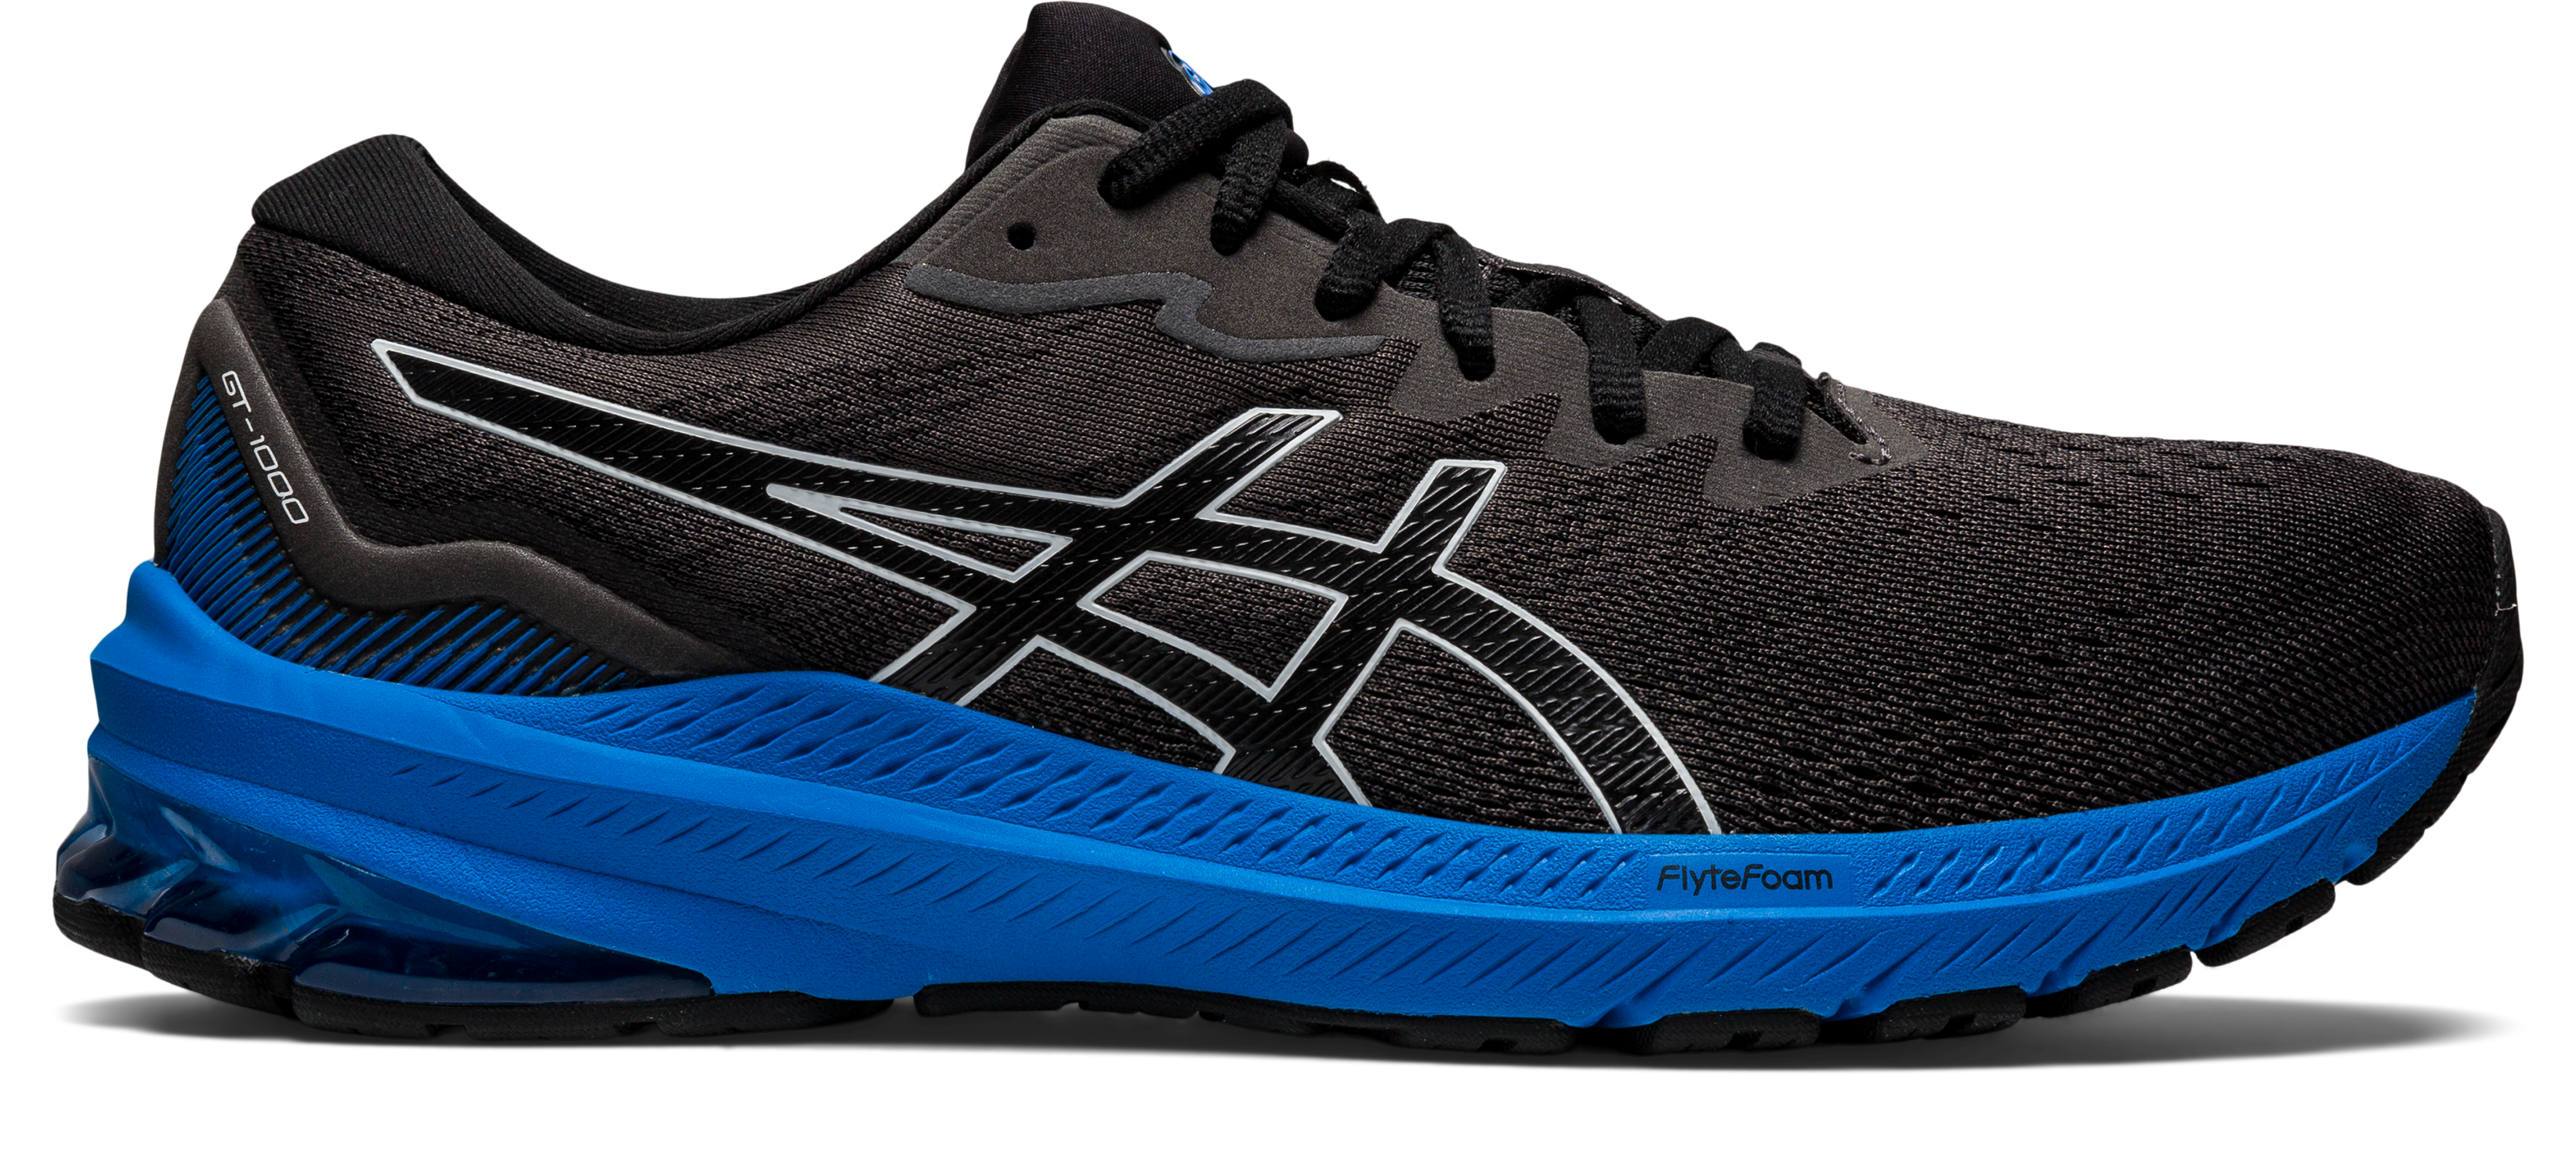 Asics Men's GT-1000 11 Running Shoes in Black/Electric Blue